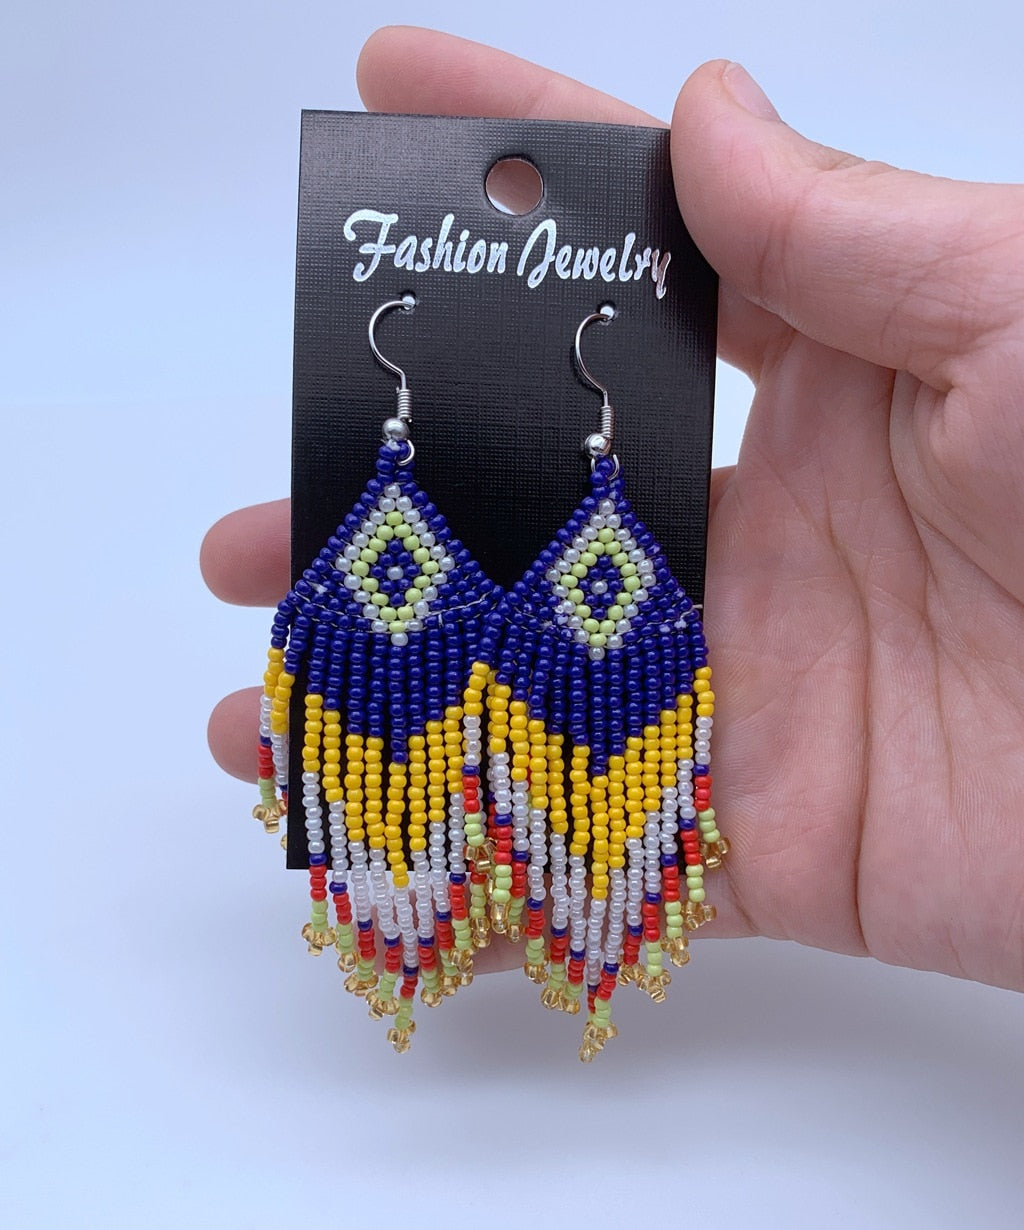 LIMAX New Arrival Colored Beads Earrings Niche Ethnic Style Handmade Jewelry Personality Bohemian Tassel Earrings - Charlie Dolly